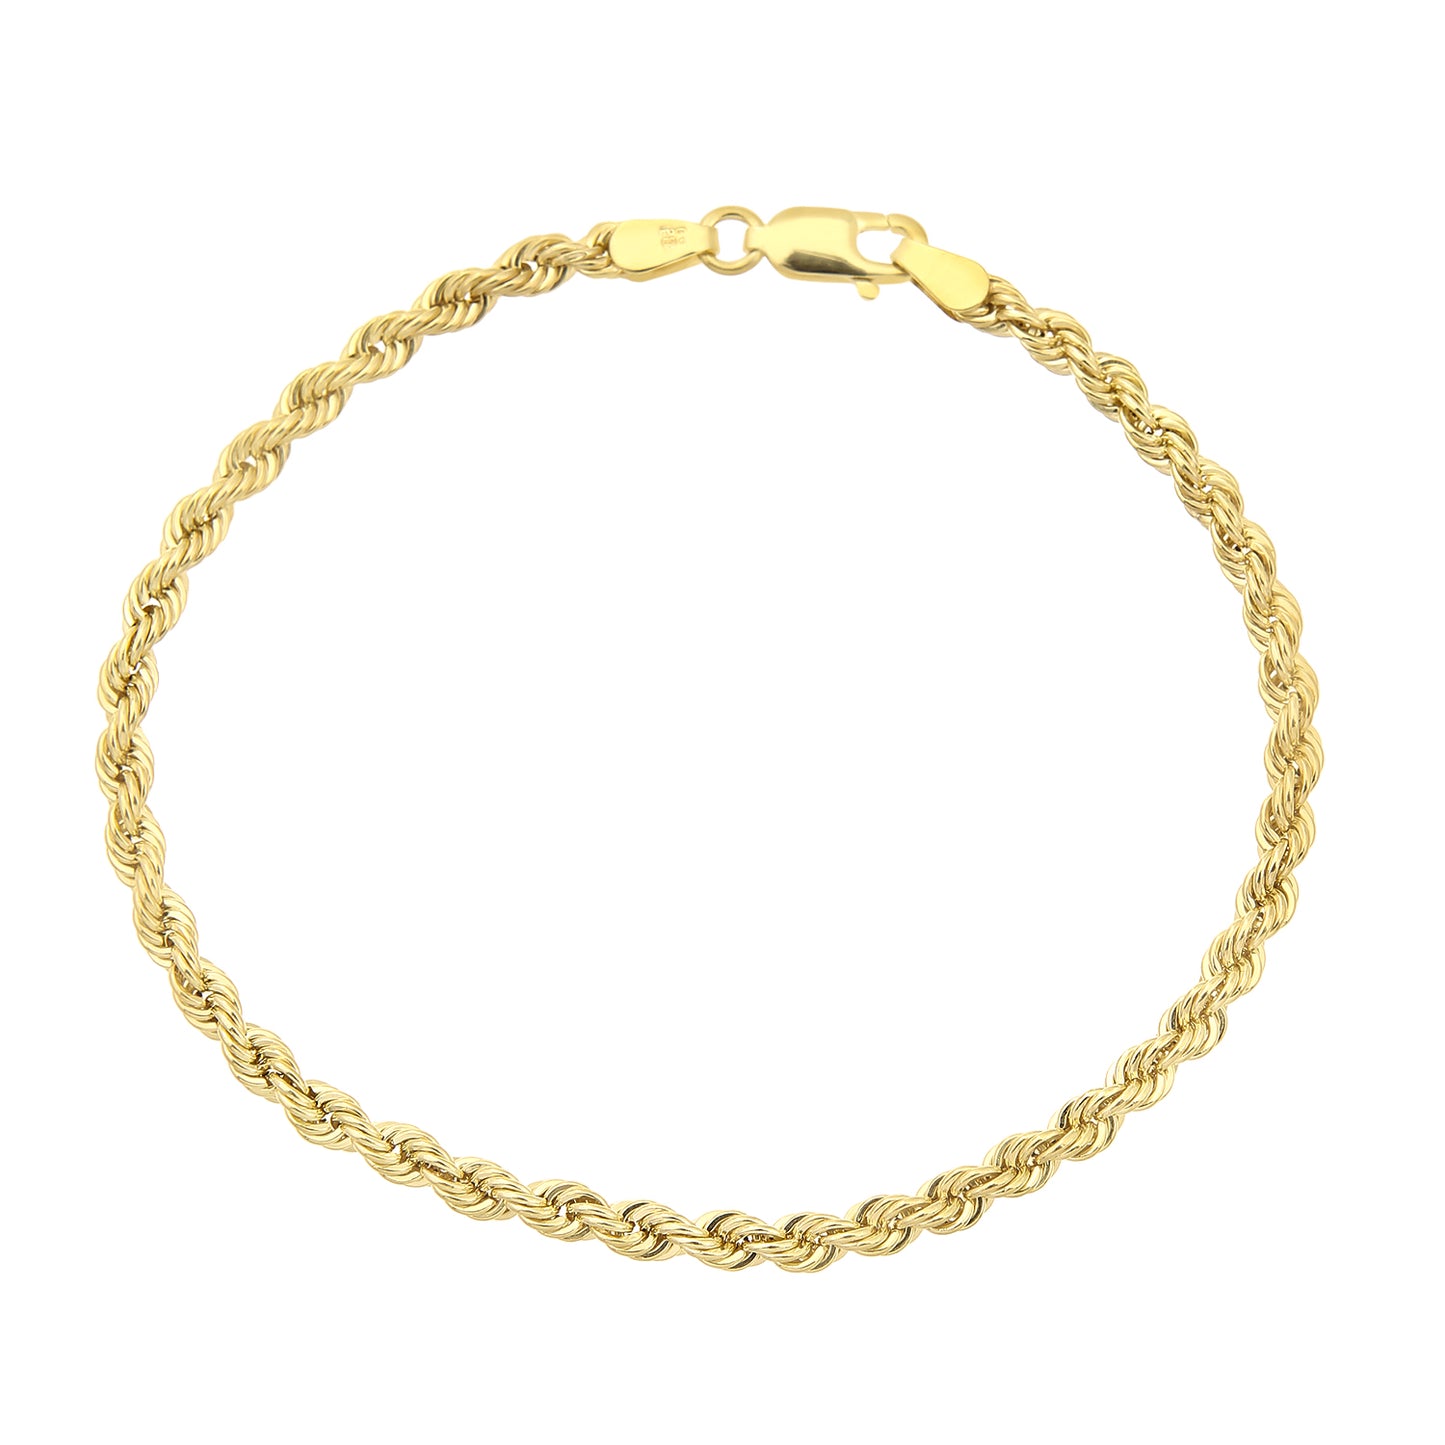 9ct Gold  Rope Chain Bracelet 3.5mm 7.5 inch - 060AXLHVC7.5